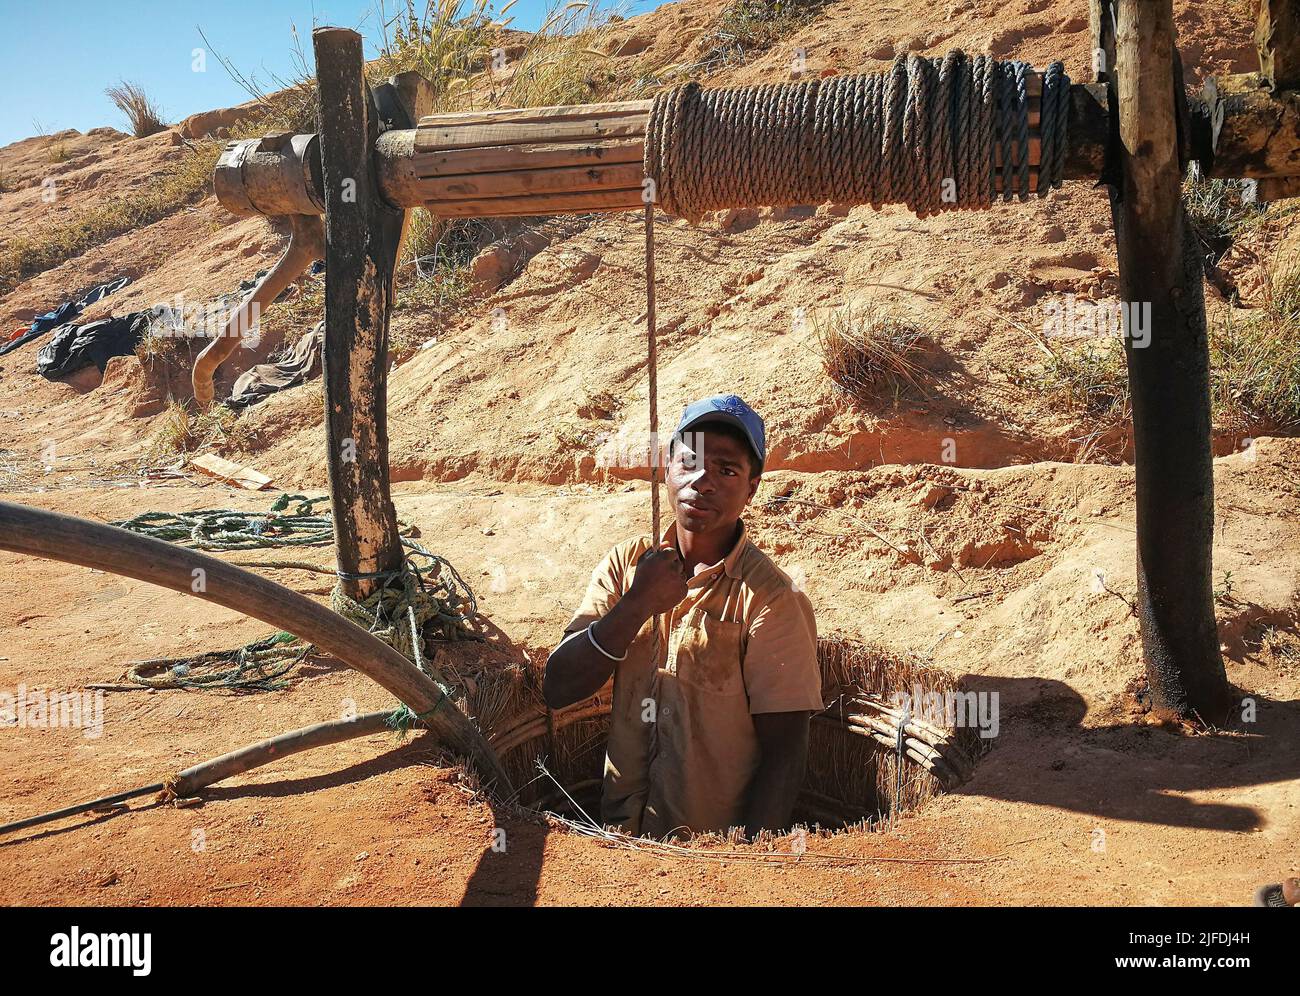 Ilakaka, Madagascar - April 30, 2019: Unknown Malagasy man standing in ground precious stone mine hole or well, half body visible, holding rope - abou Stock Photo